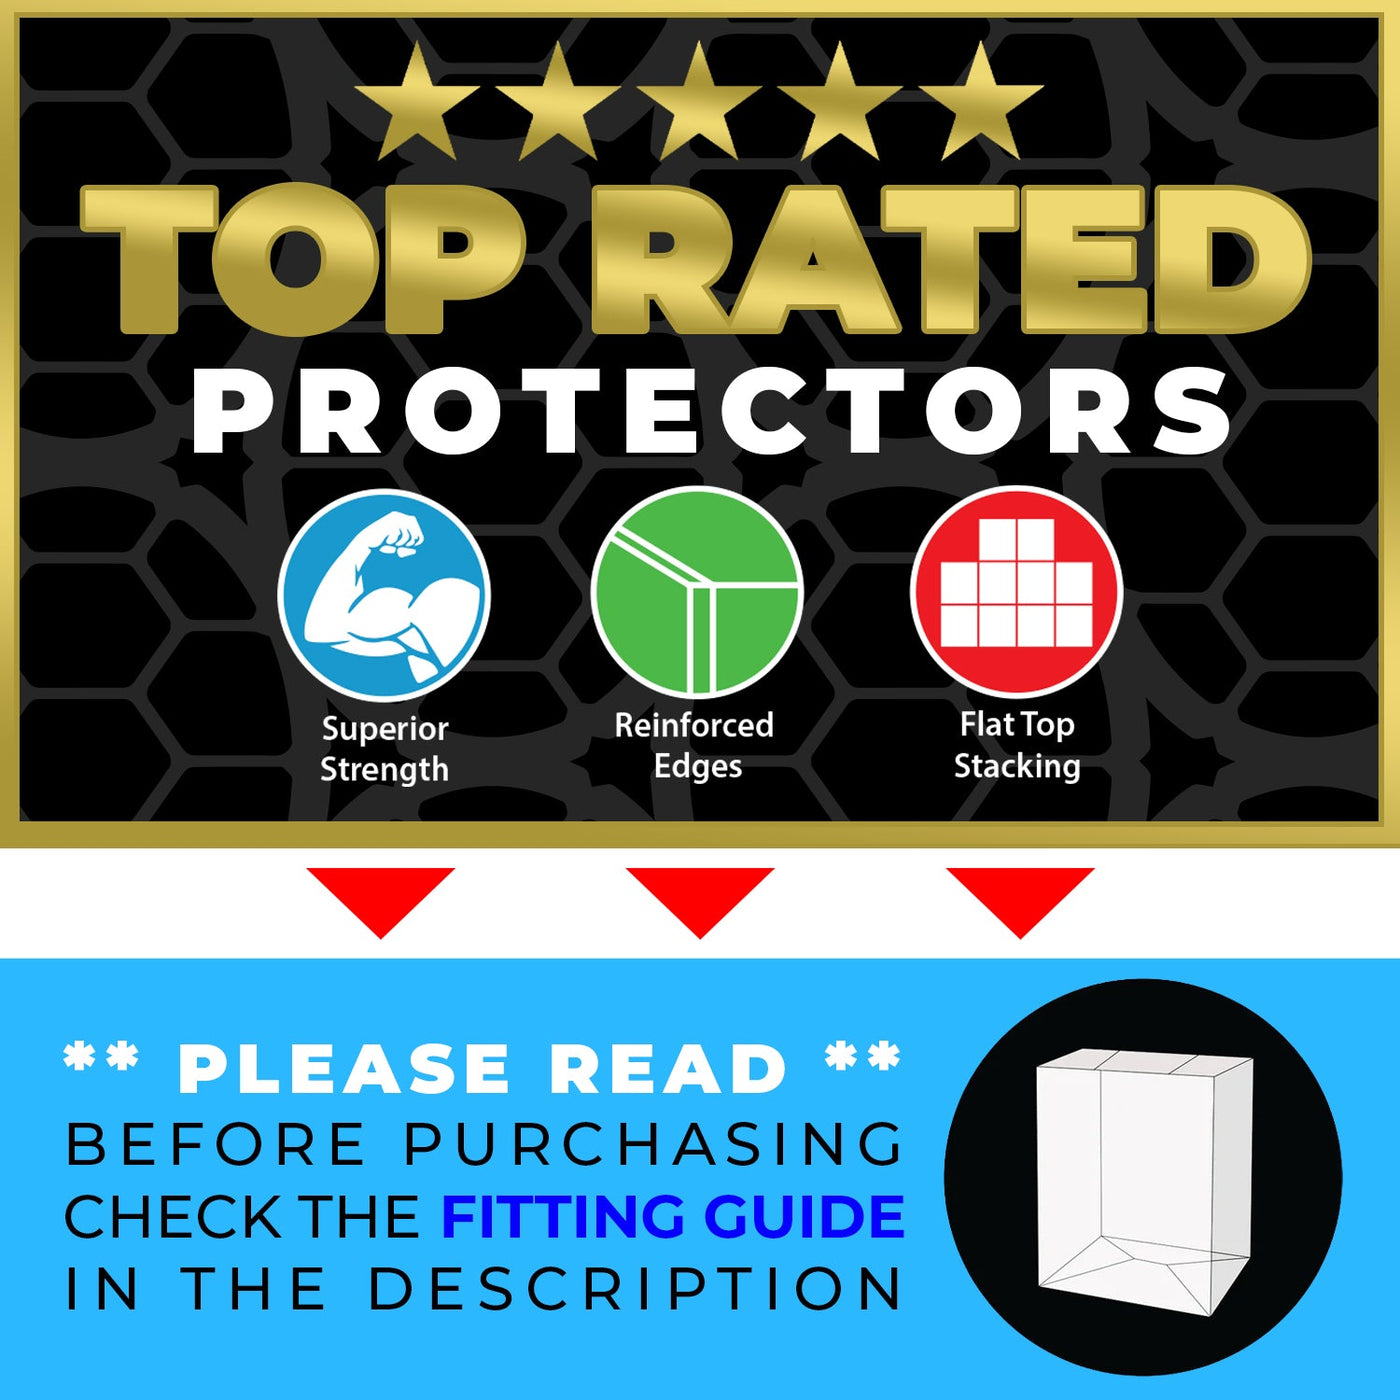 3 pops side by side best funko pop protectors thick strong uv scratch flat top stack vinyl display geek plastic shield vaulted eco armor fits collect protect display case kollector protector